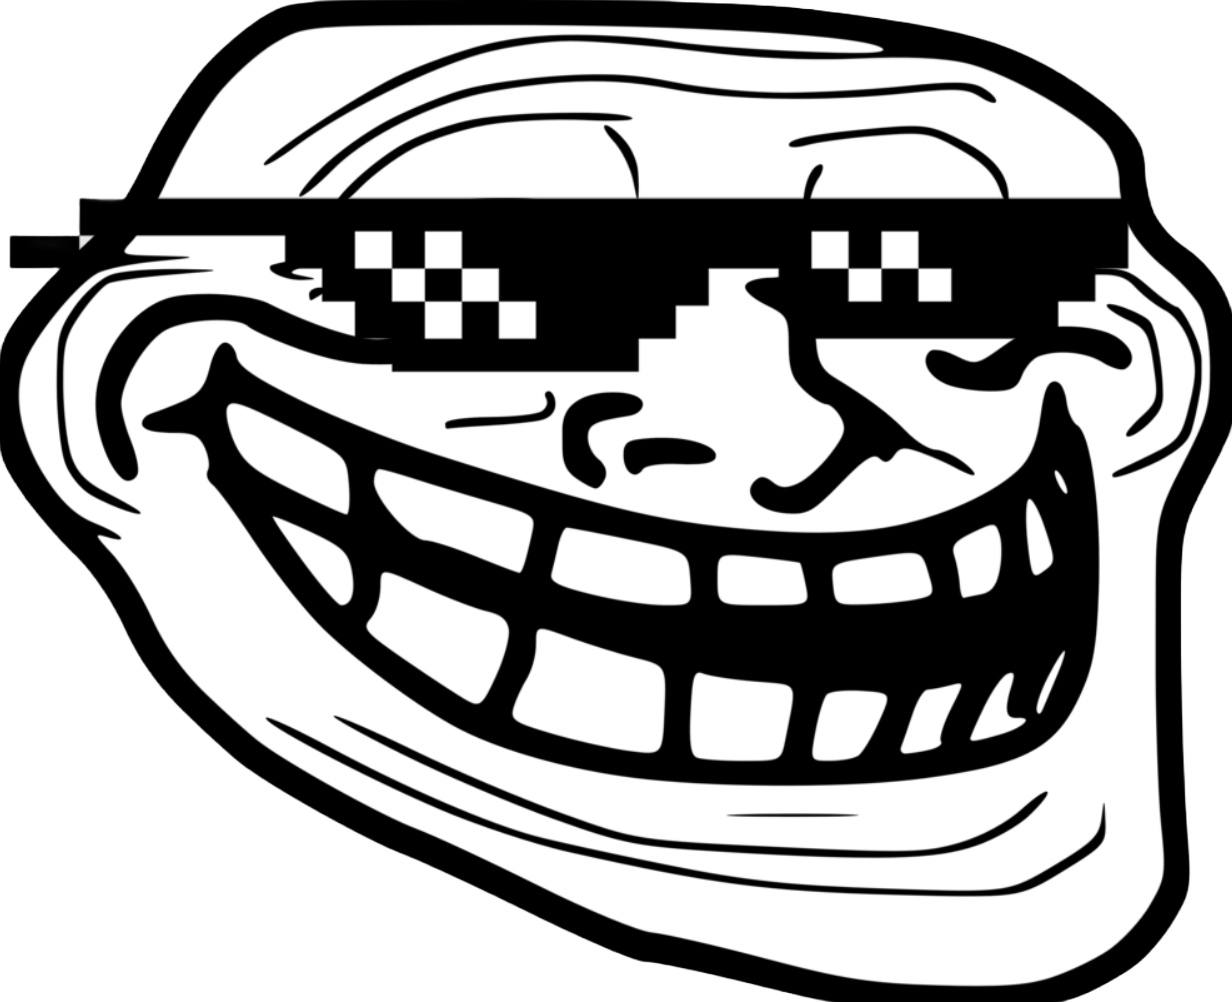 real troll face by Jwpepr on DeviantArt